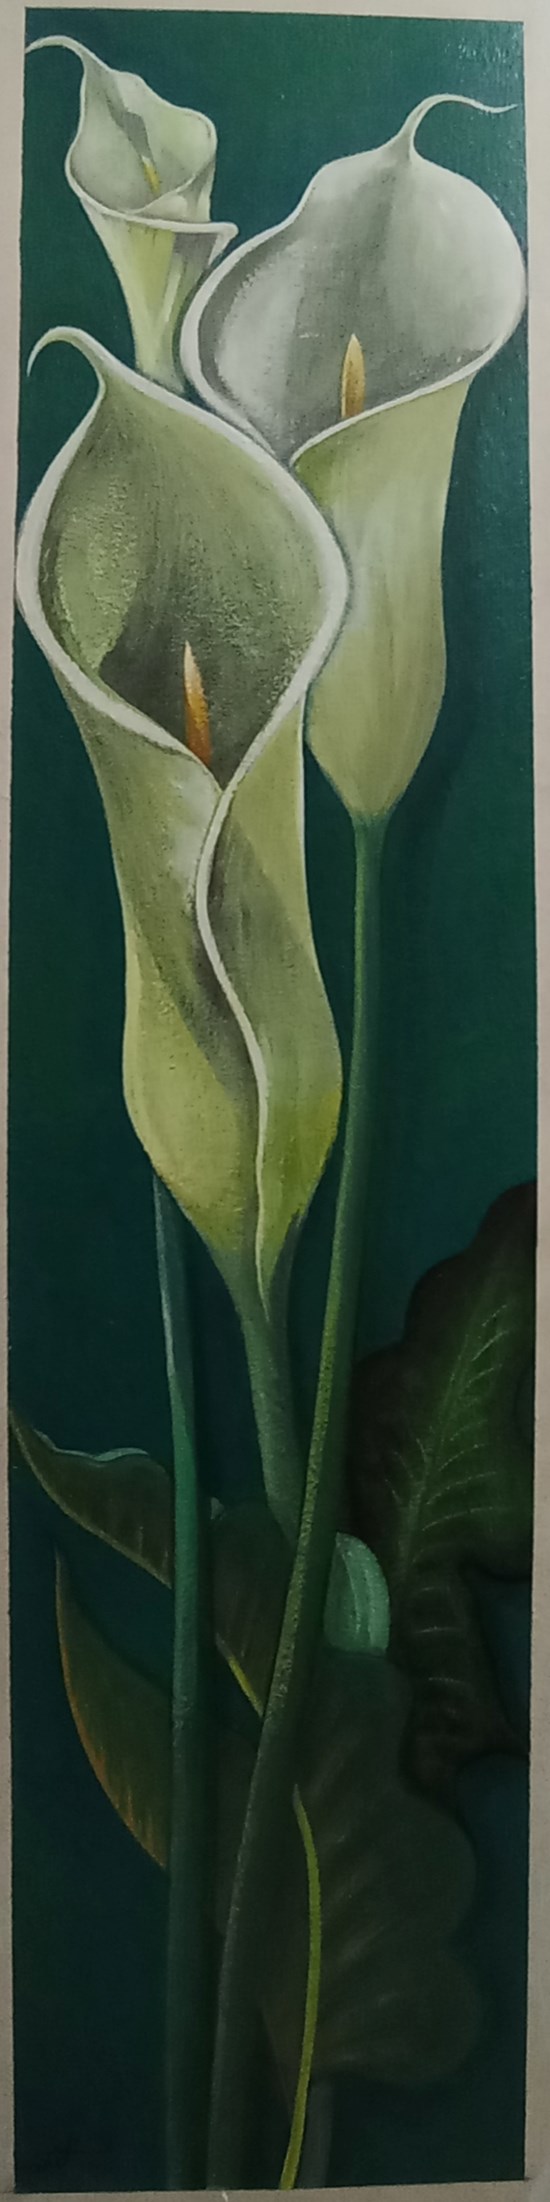 Three Calla flowers, painting by Khaled Hamdy .H